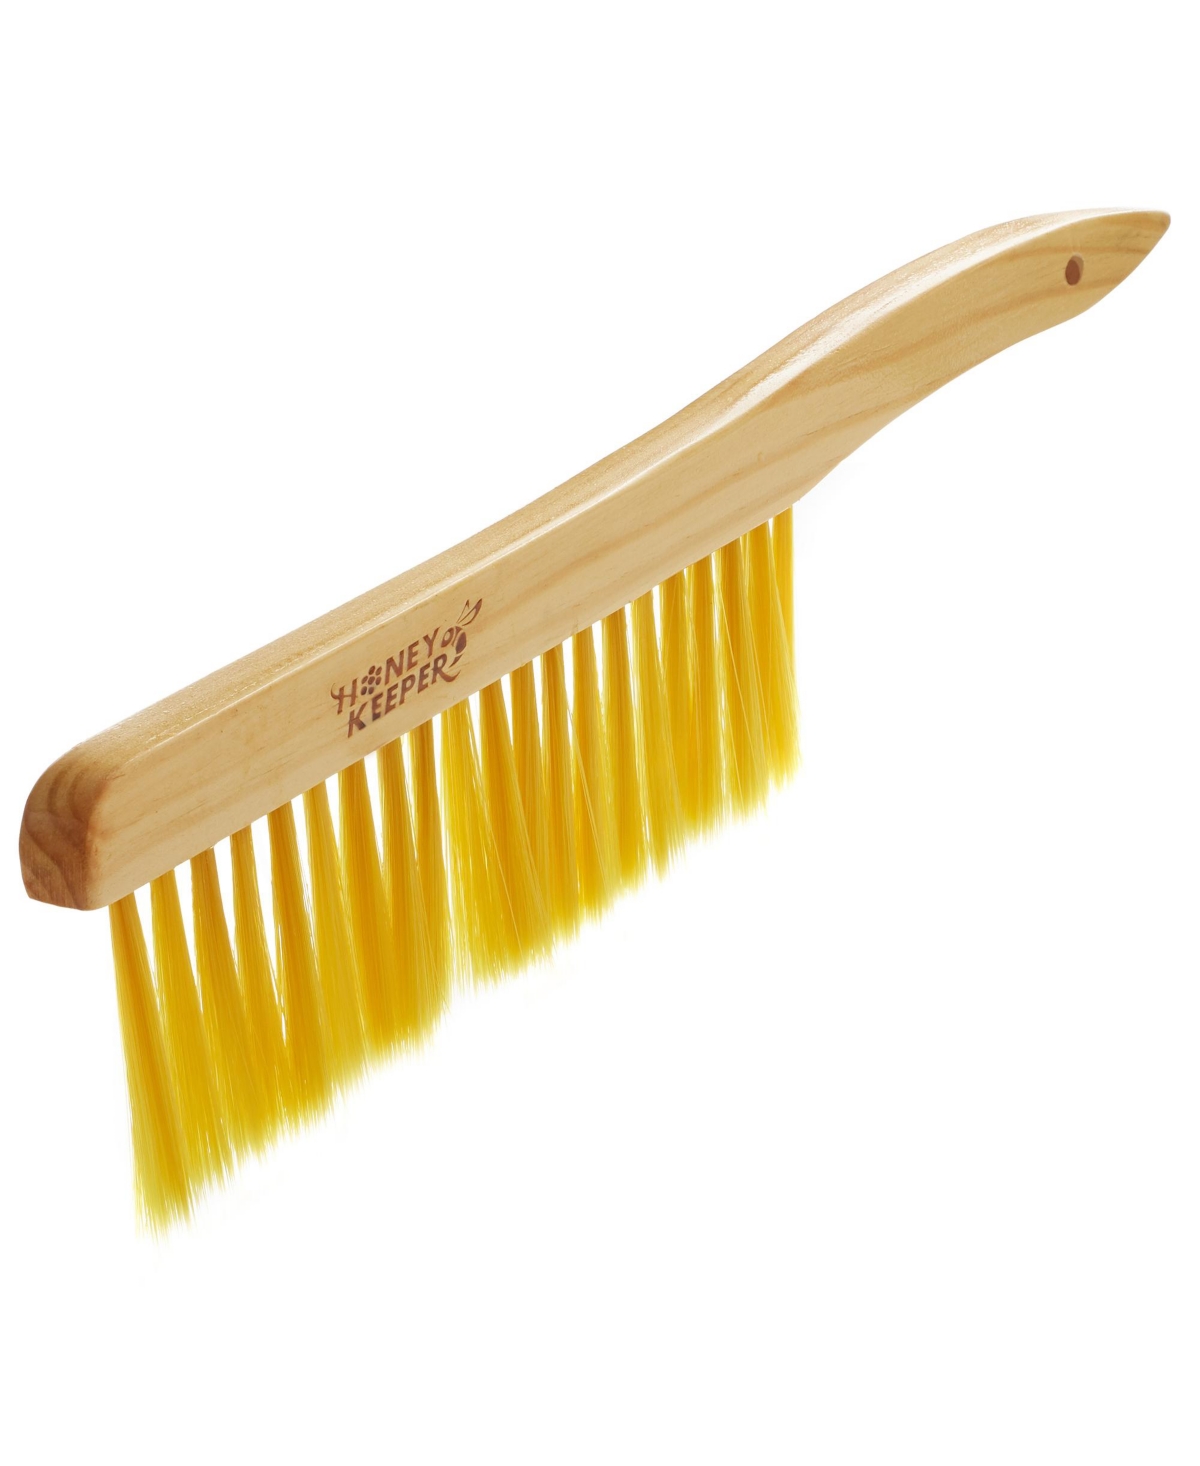 14-Inch Bee Hive Brush with Wooden Handle - Beekeeping Tool for Beekeepers - Yellow